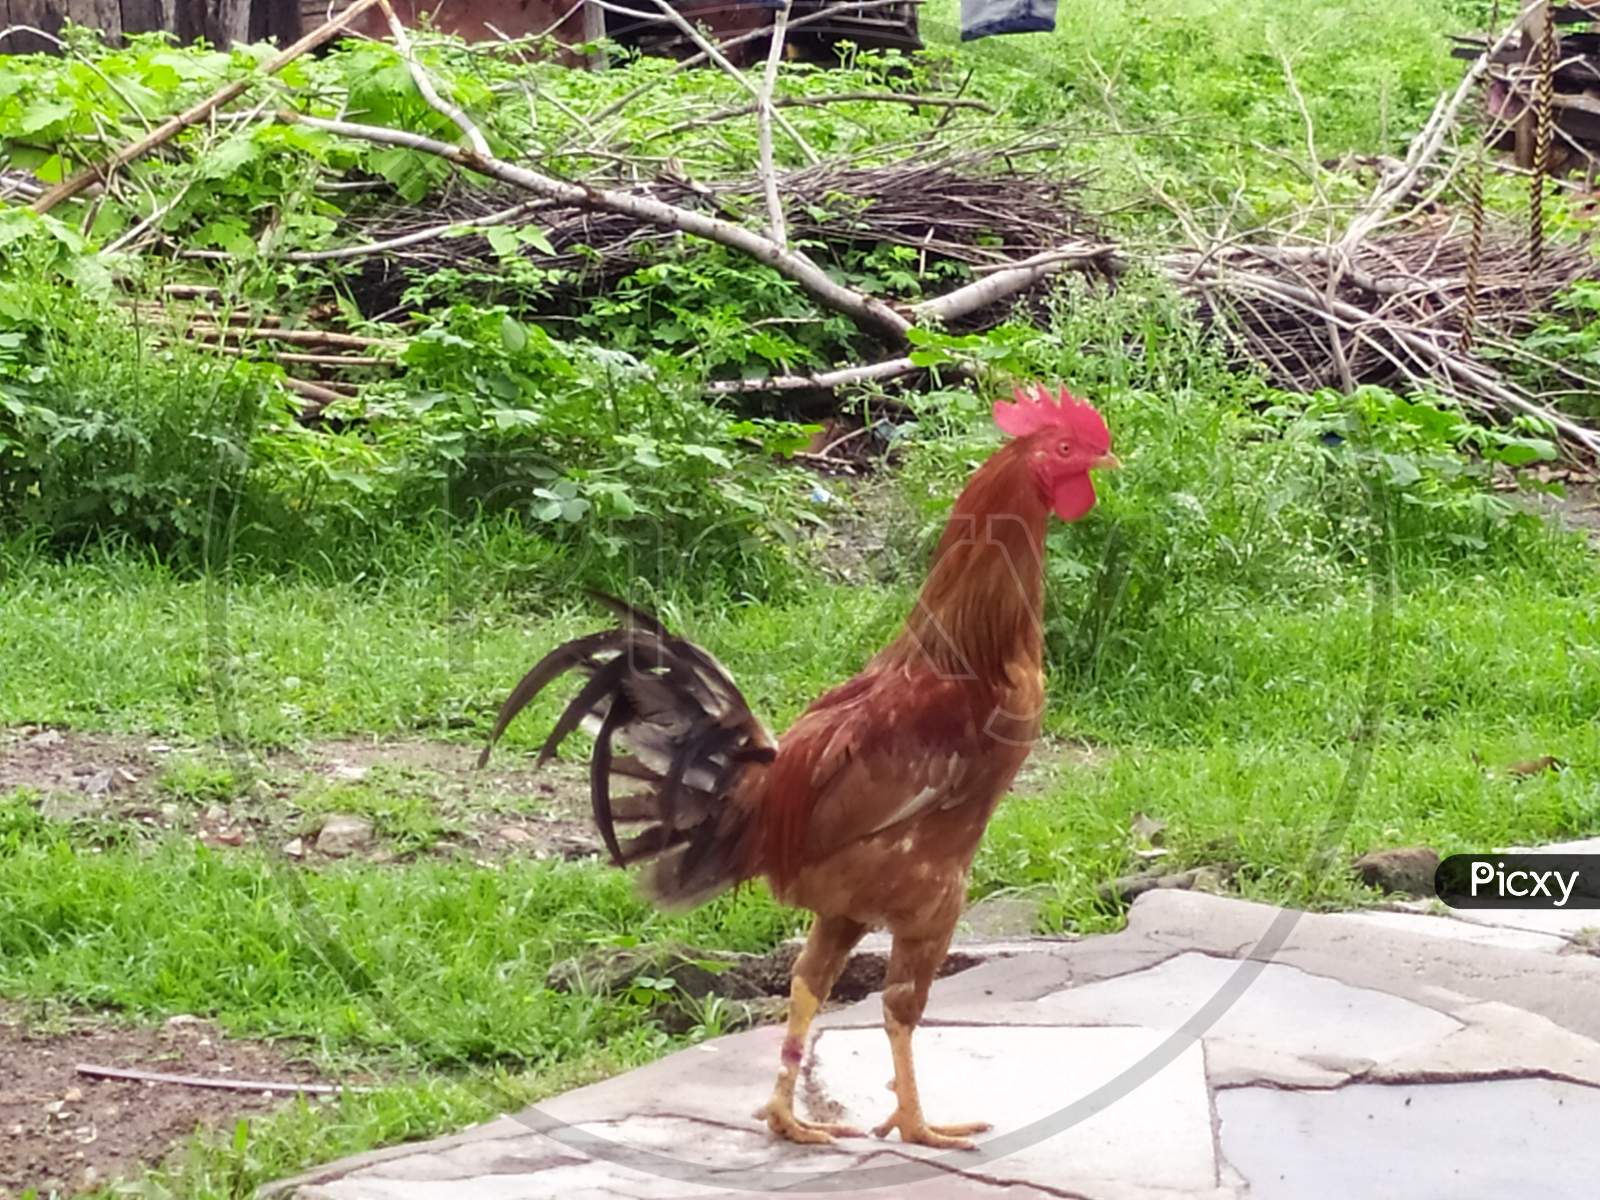 Wild and feral chicken rooster in Nagpur, India